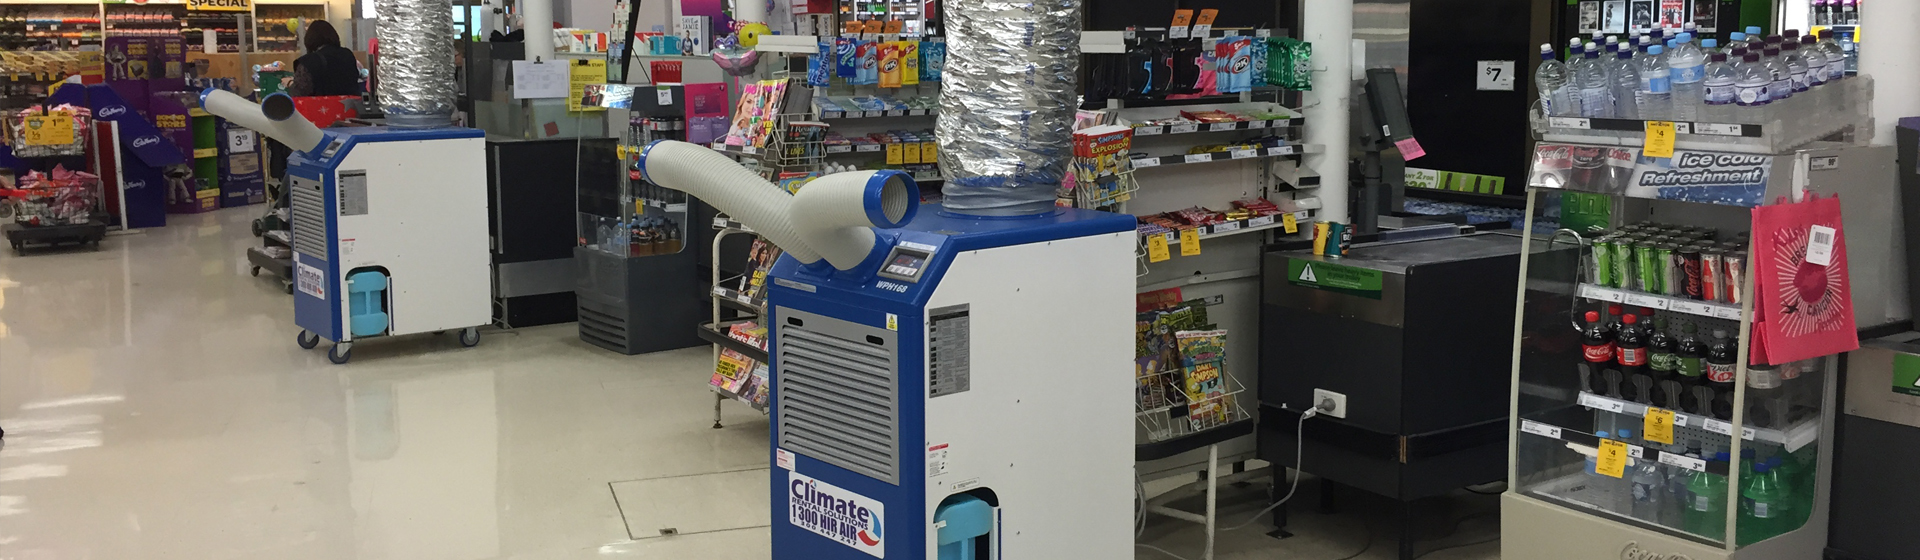 Enough machines to cool a supermarket